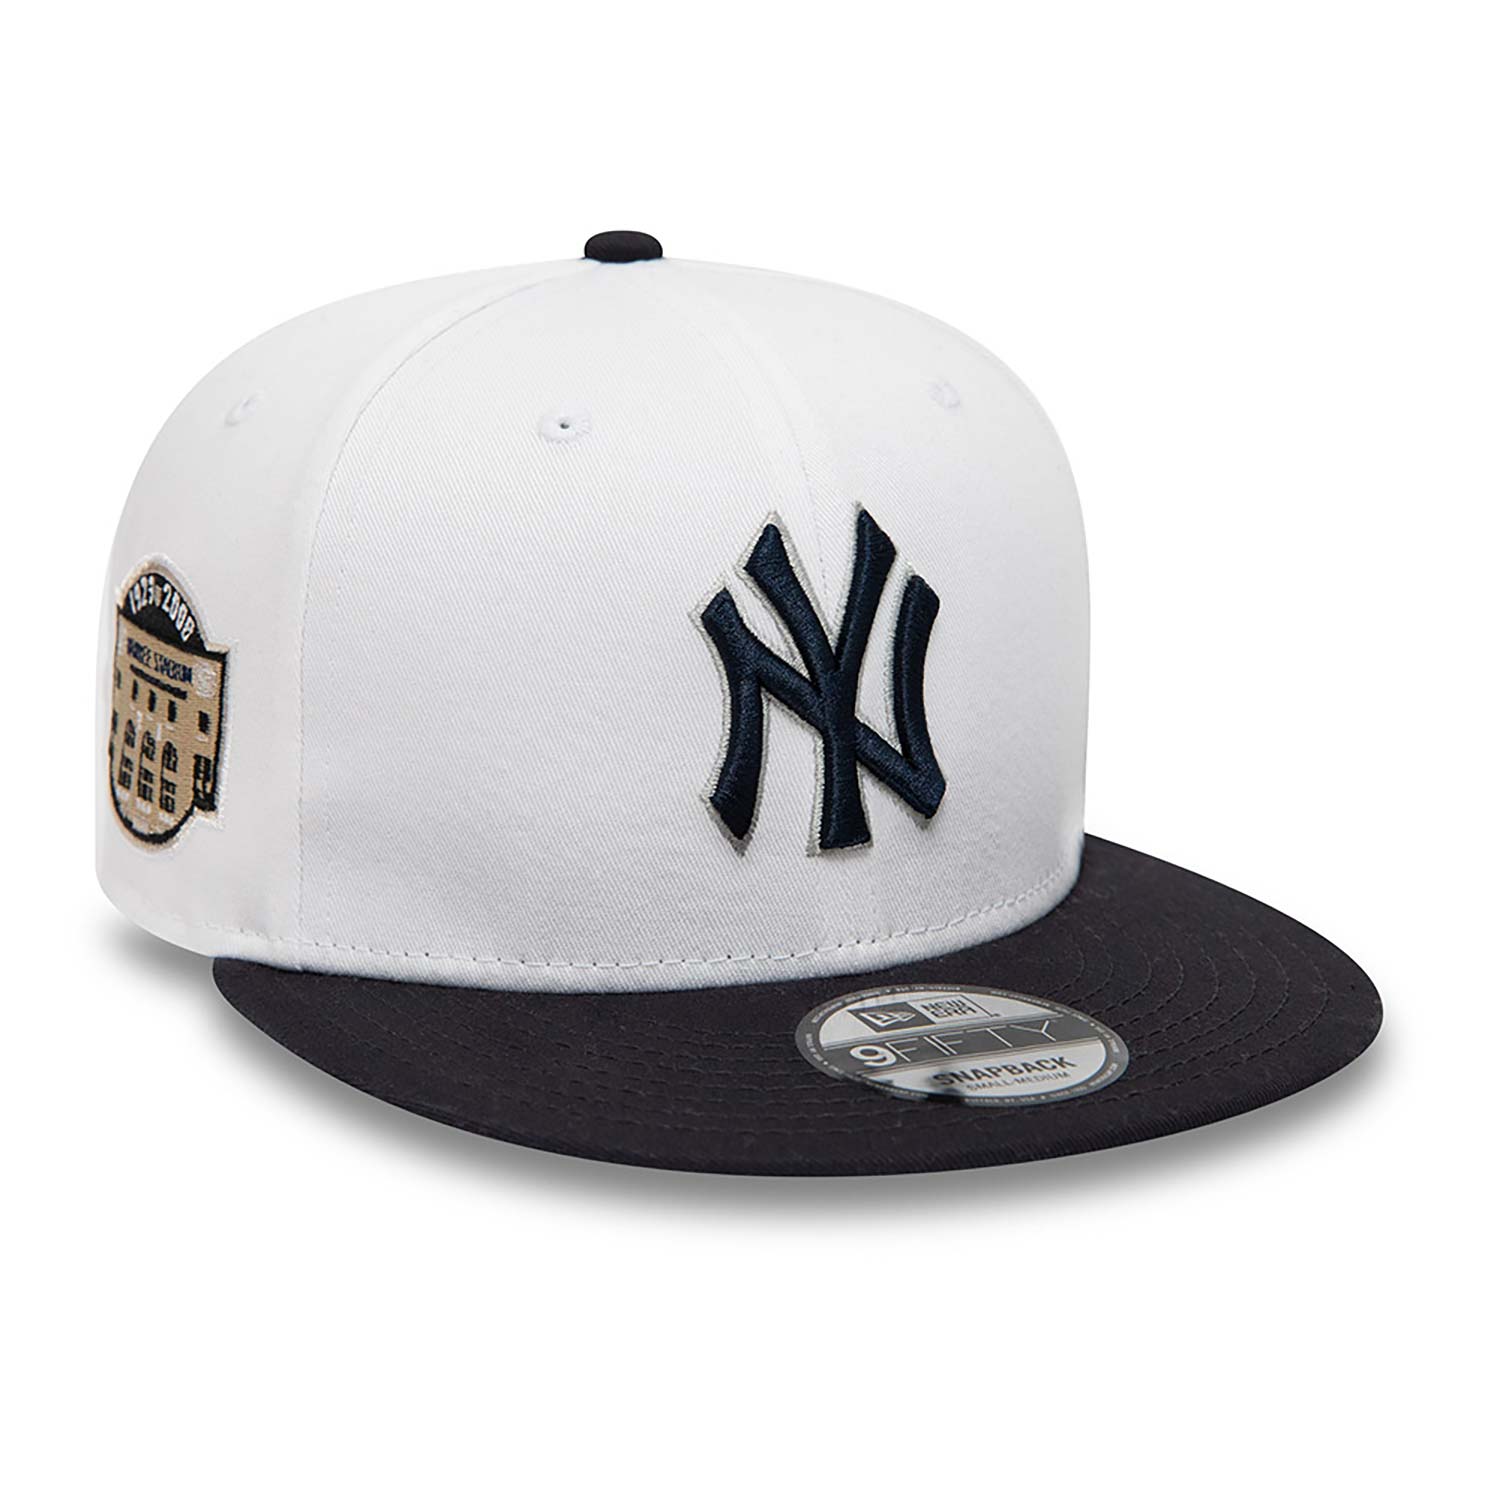 Gorra oficial New Era New York Yankees Crown Patches Blanco 9fifty